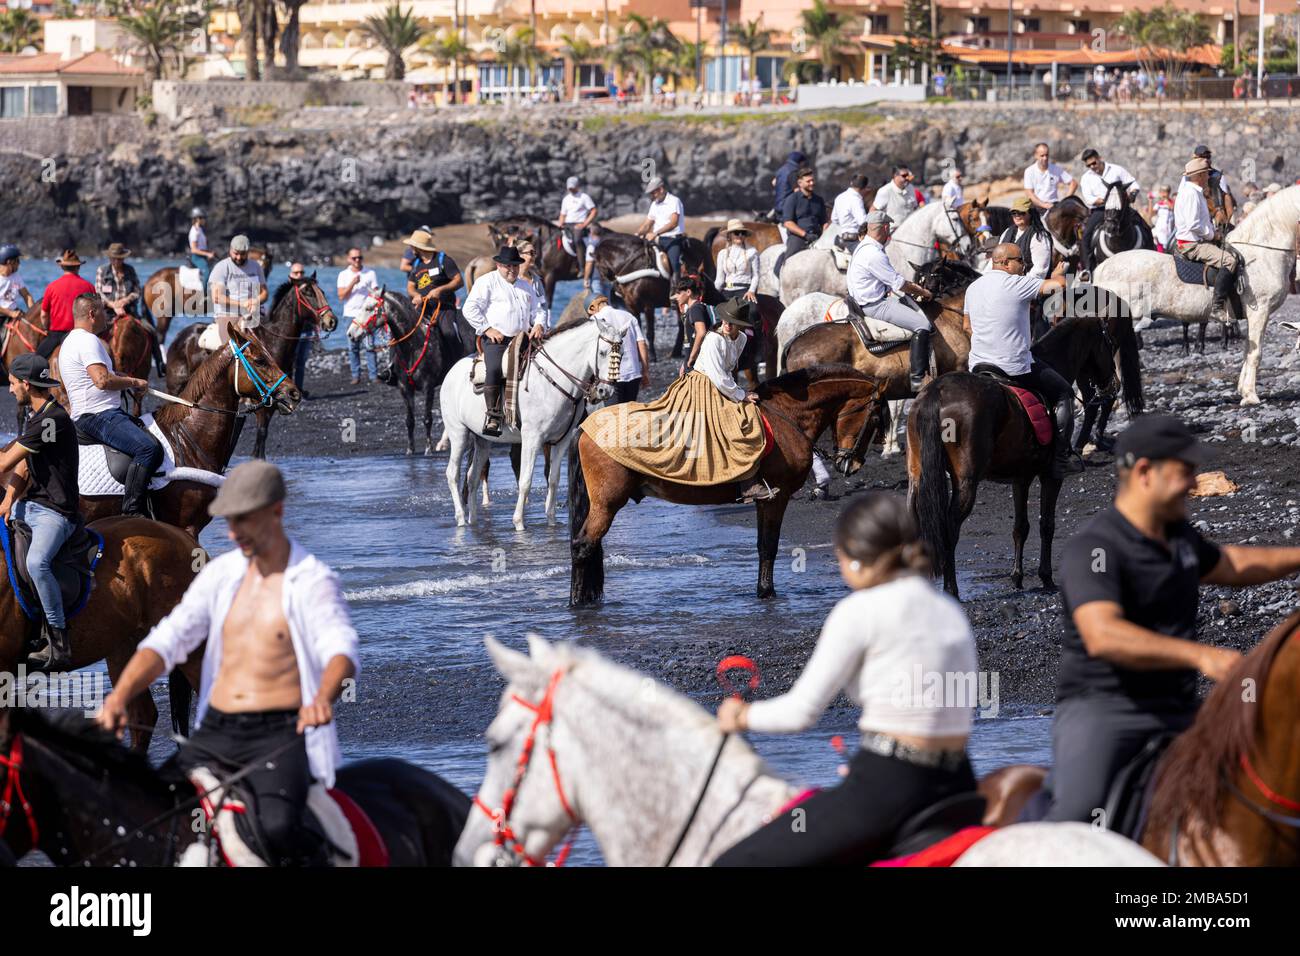 Costa Adeje, Tenerife, Canary Islands, 20 January 2023. Riders take their mounts into the sea at Playa Enramada beach during the fiesta of San Sebastian which returns for the first time since 2020 due to the covid pandemic restrictions. The annual fiesta in La Caleta on the Costa Adeje is enjoyed by locals and tourists who gather to see the many horses that come to bathe in the sea at the Playa Enramada beach. Credit: Phil Crean A/Alamy Live News Stock Photo